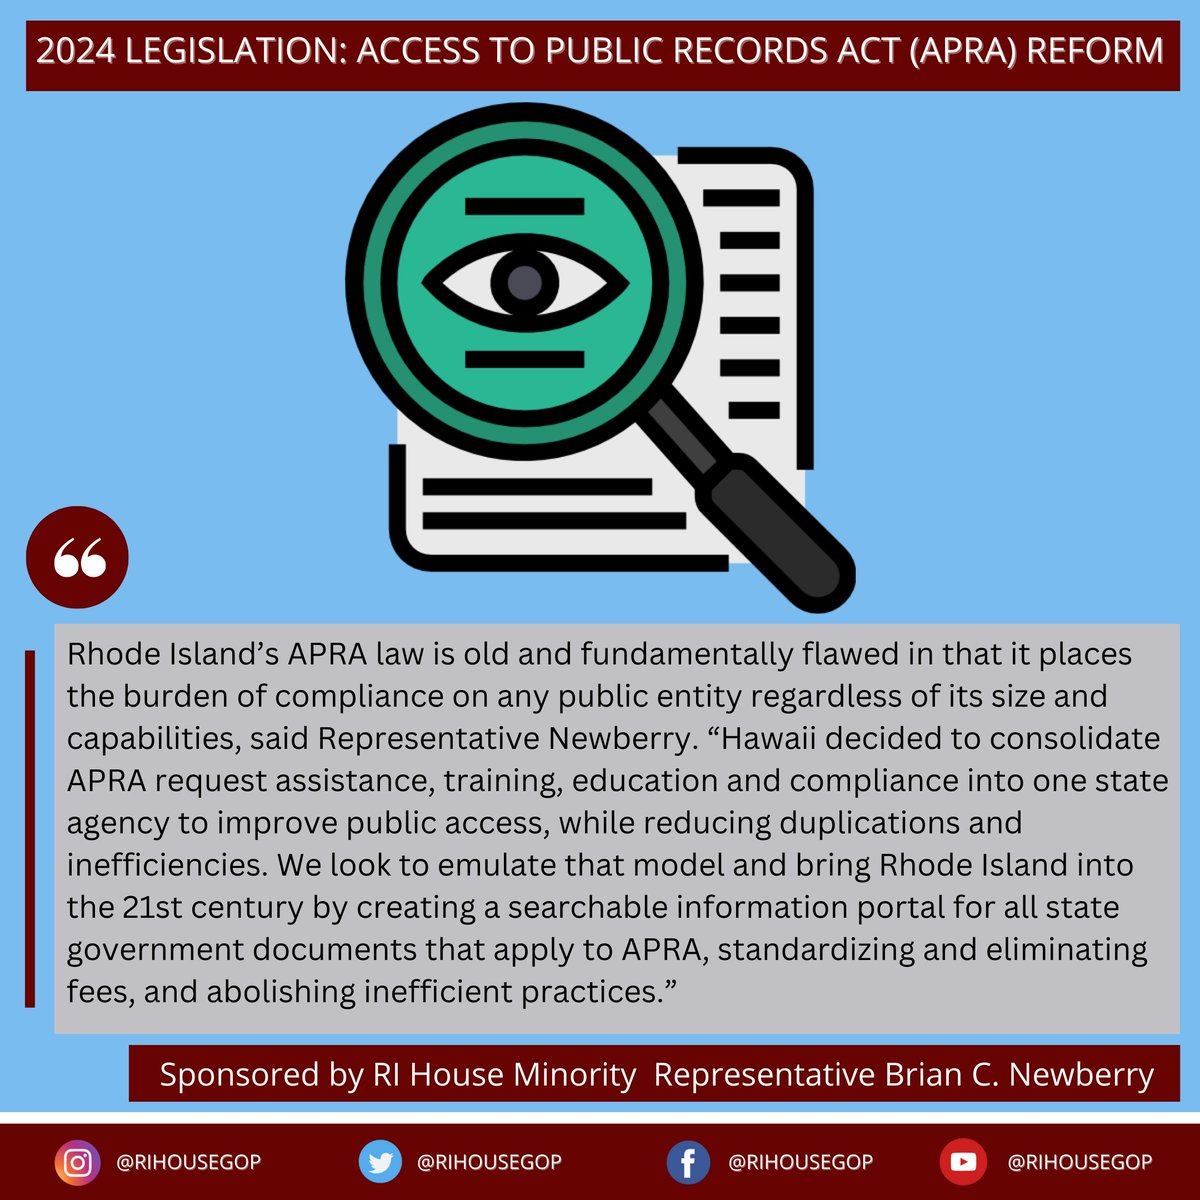 TODAY: Access to Public Records Act (APRA) Reform (H7763) heard in House State Govt & Elections. @BrianCNewberry introduced to provide free APRA records, place mgmt of APRA Records within DOA, & uses online database. Pls support HouseStateGovernmentandElections@rilegislature.gov